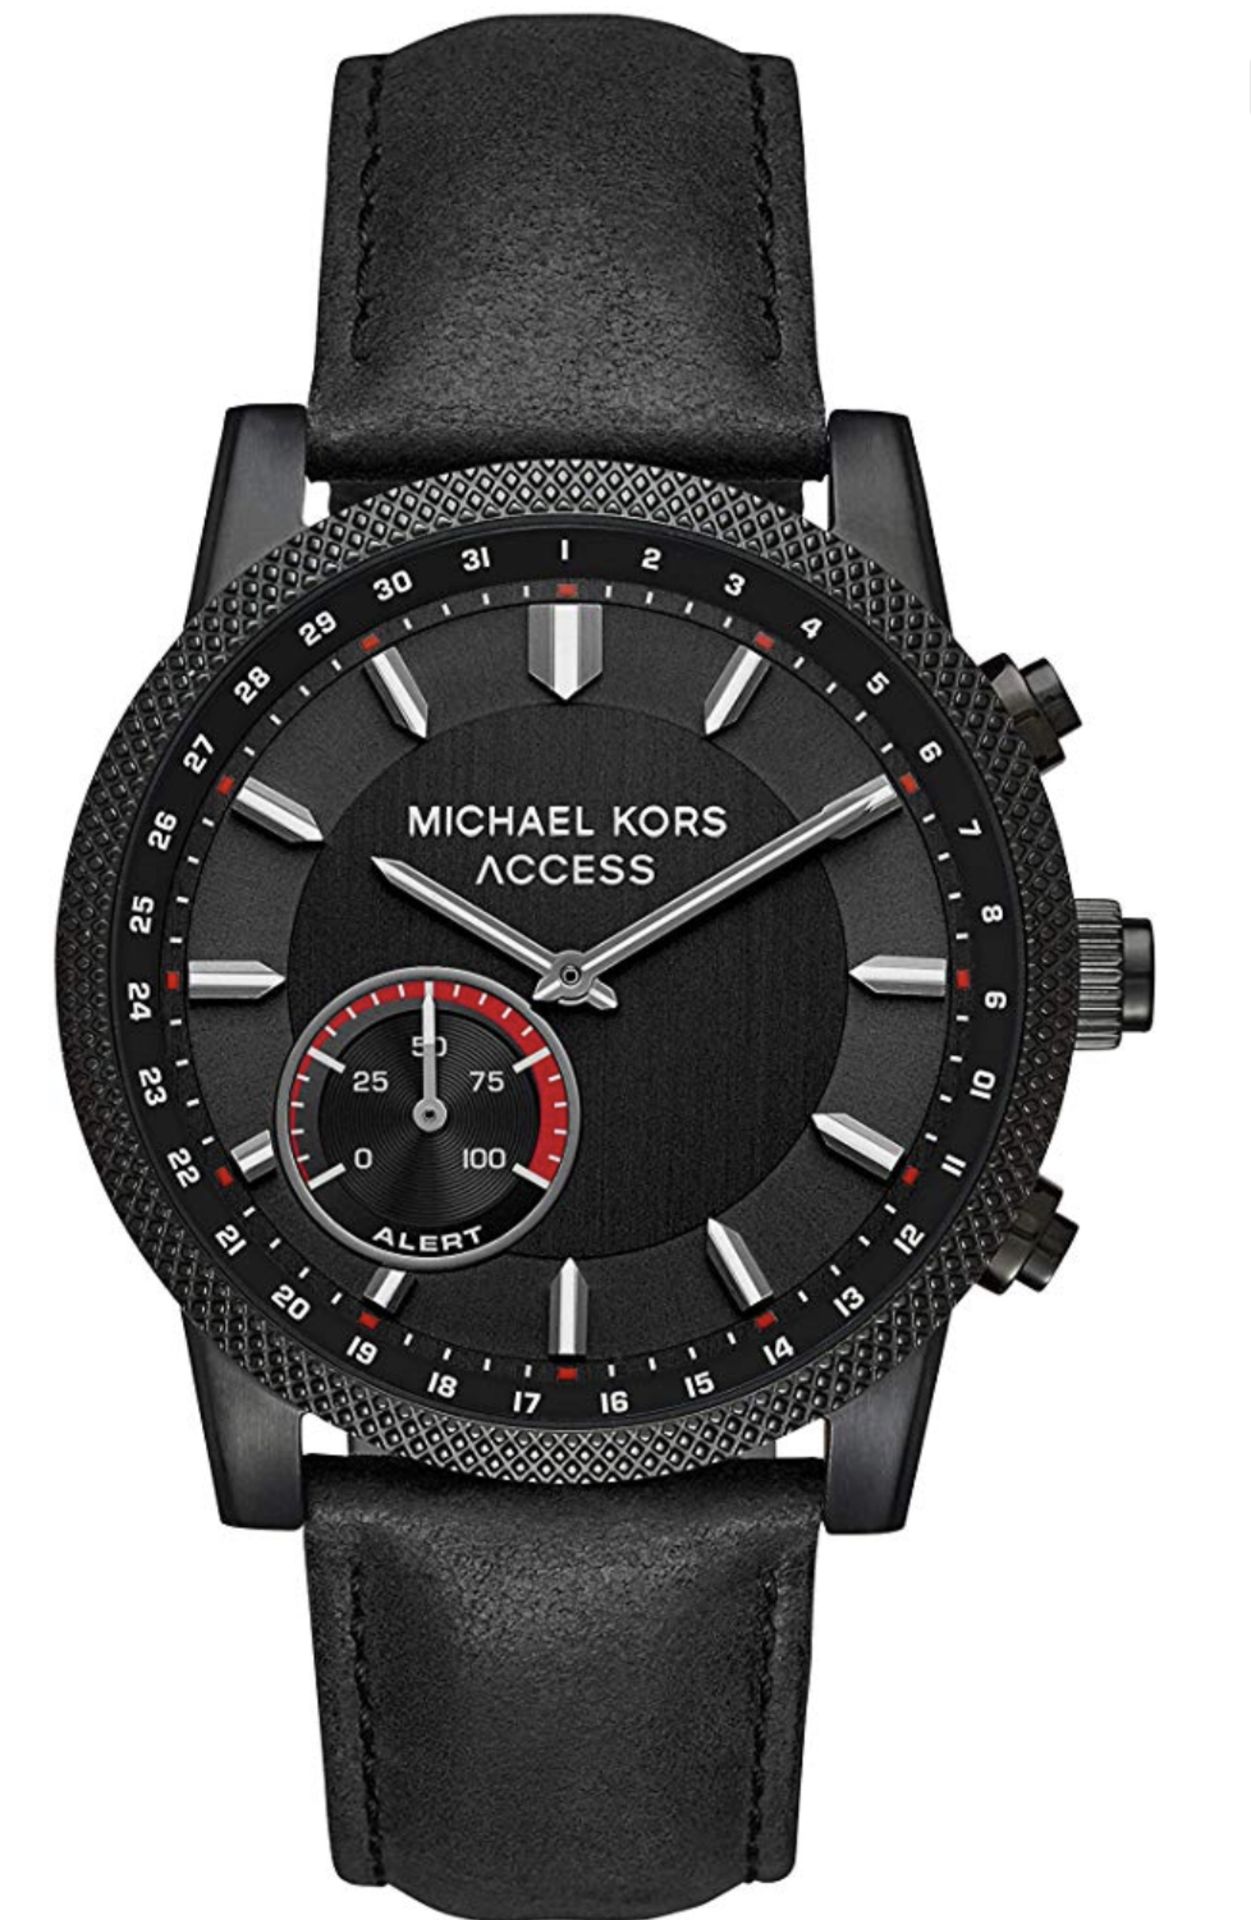 Michael Kors mkt4025 Men's Hutton Hybrid Smartwatch. Quartz Stainless Steel and Leather - Image 5 of 5